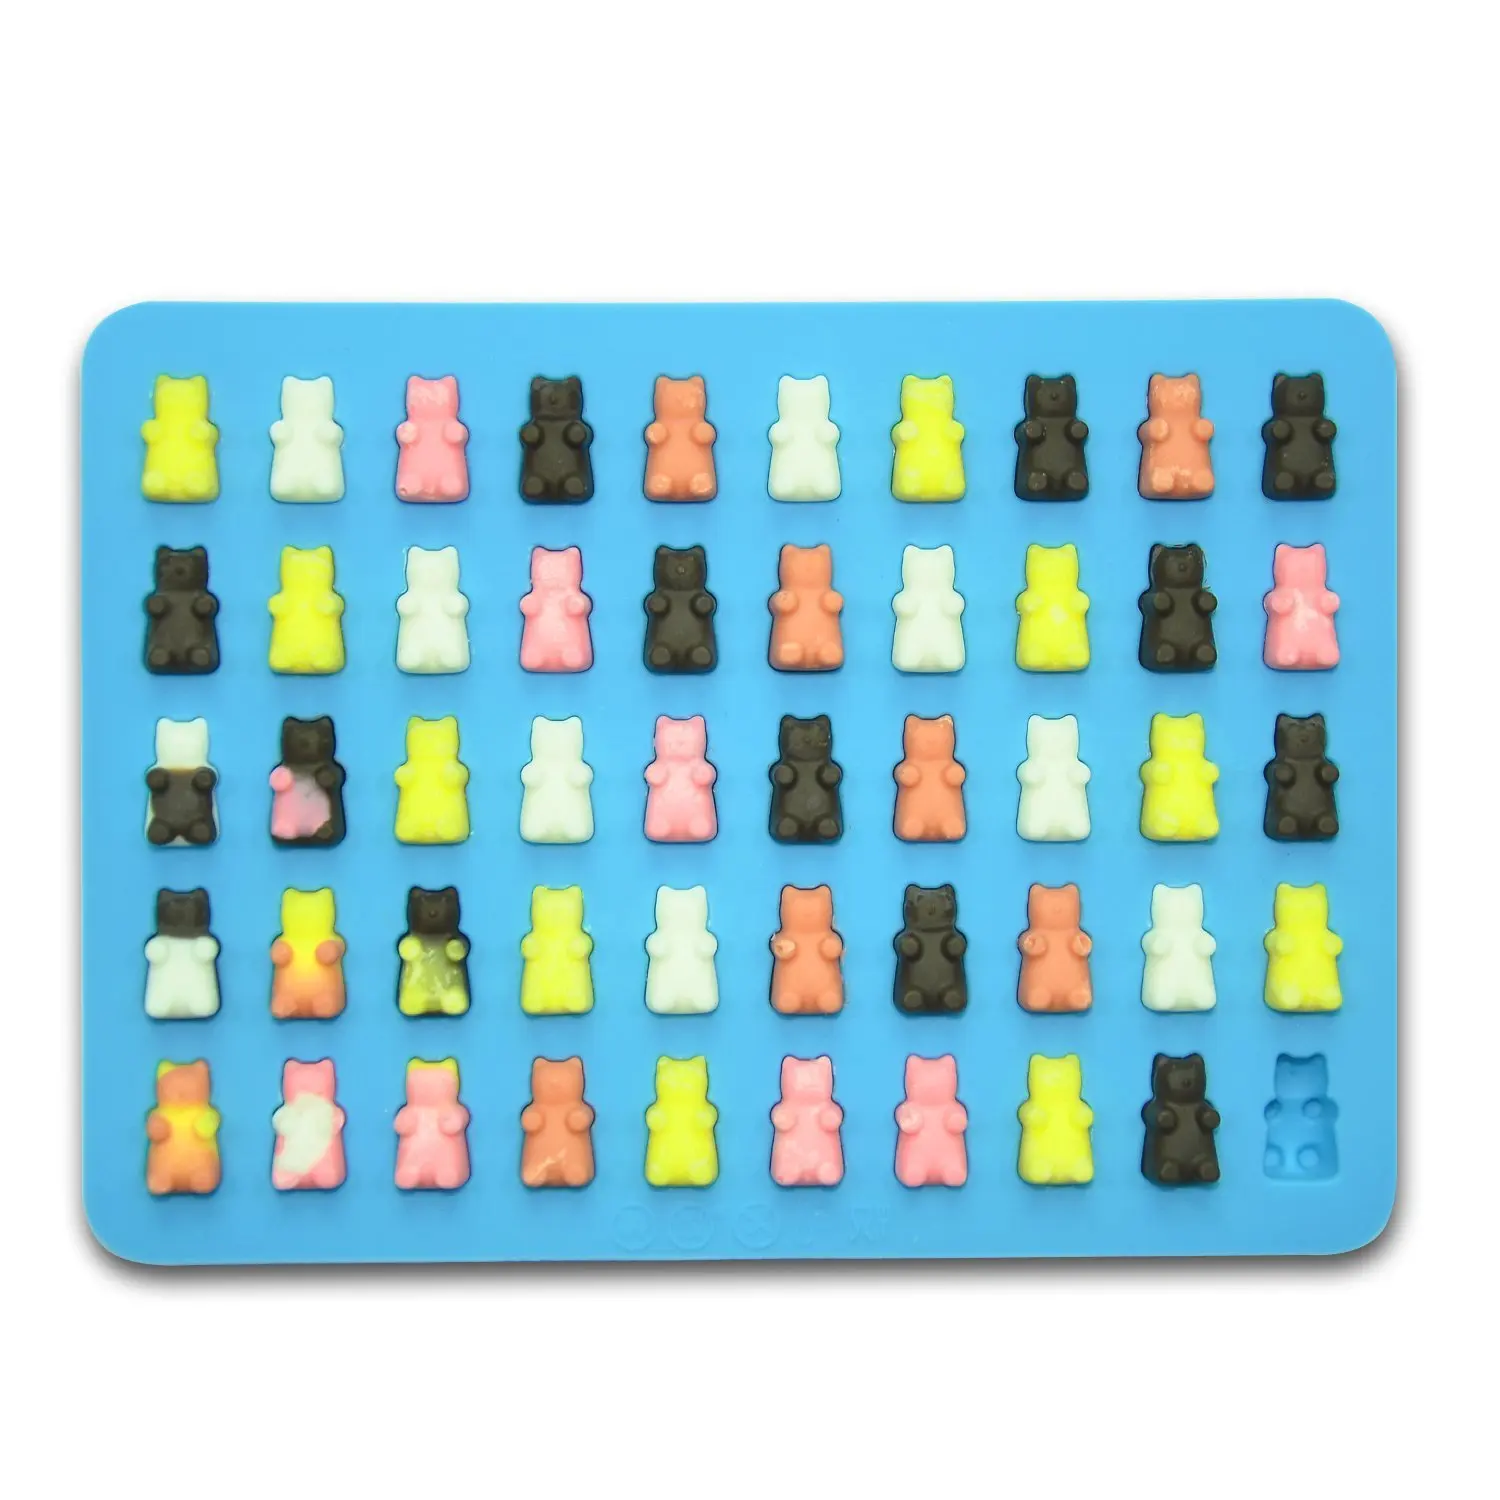 Details about   Christmas Silicone Gummy Chocolate Cookie Baking Ice Cube Tray Candy Jelly MouW1 